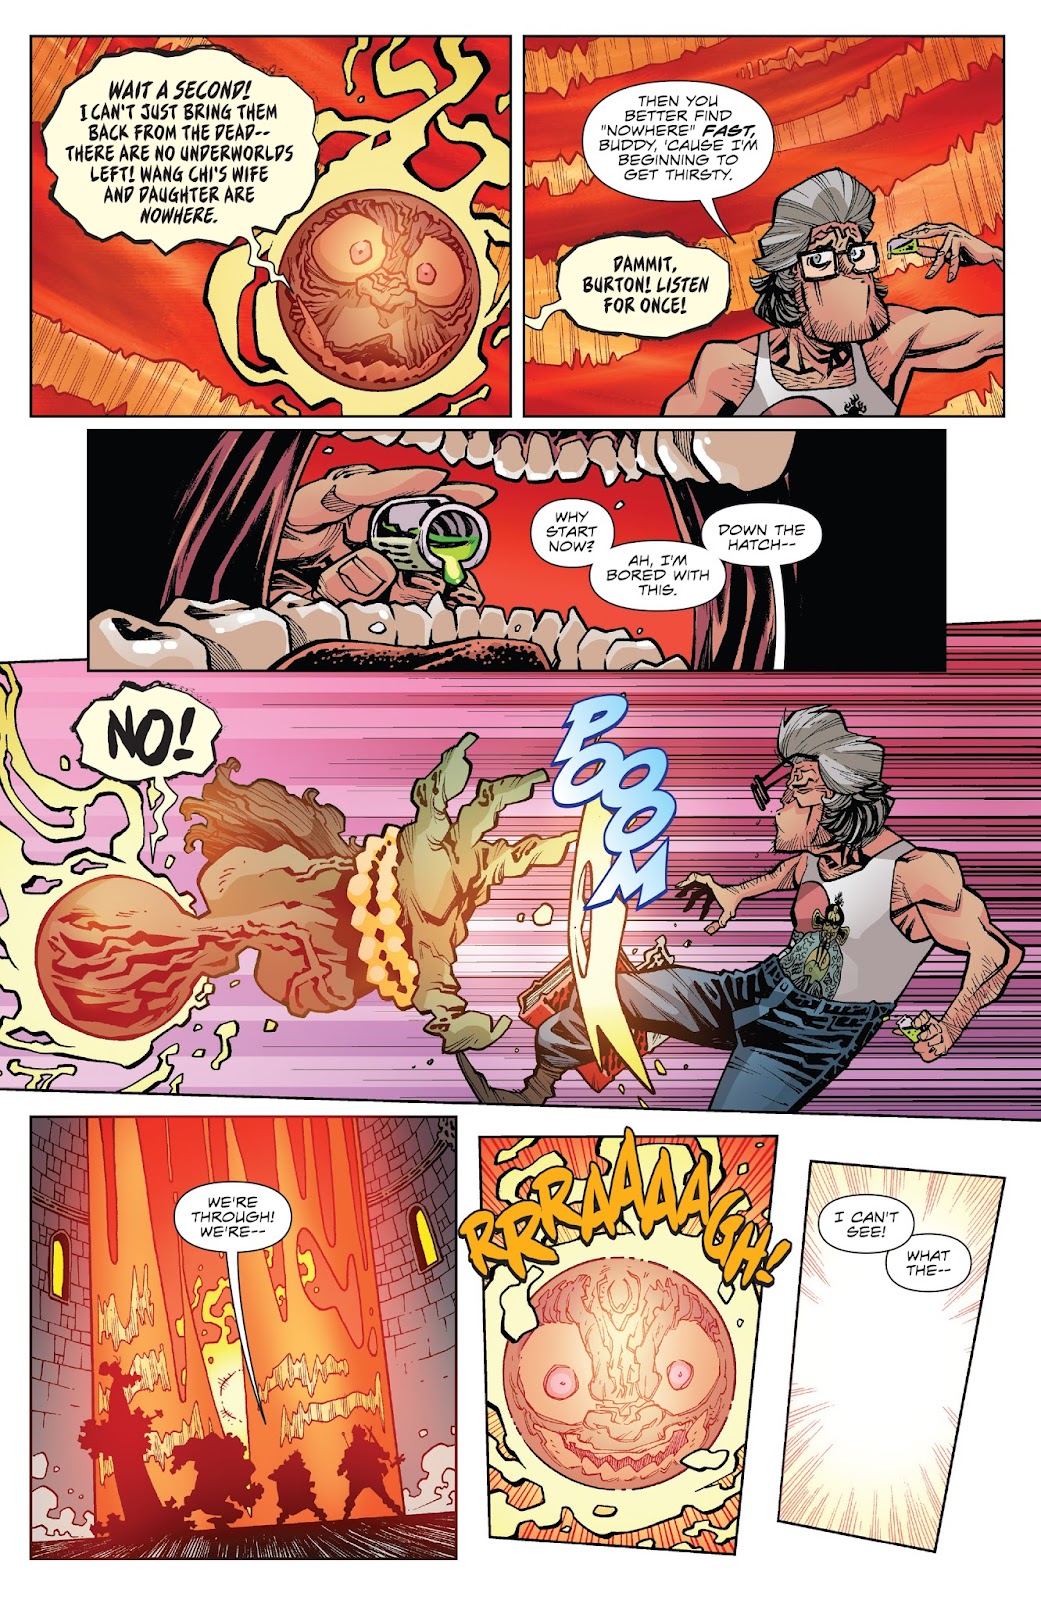 Big Trouble in Little China: Old Man Jack issue 8 - Page 16